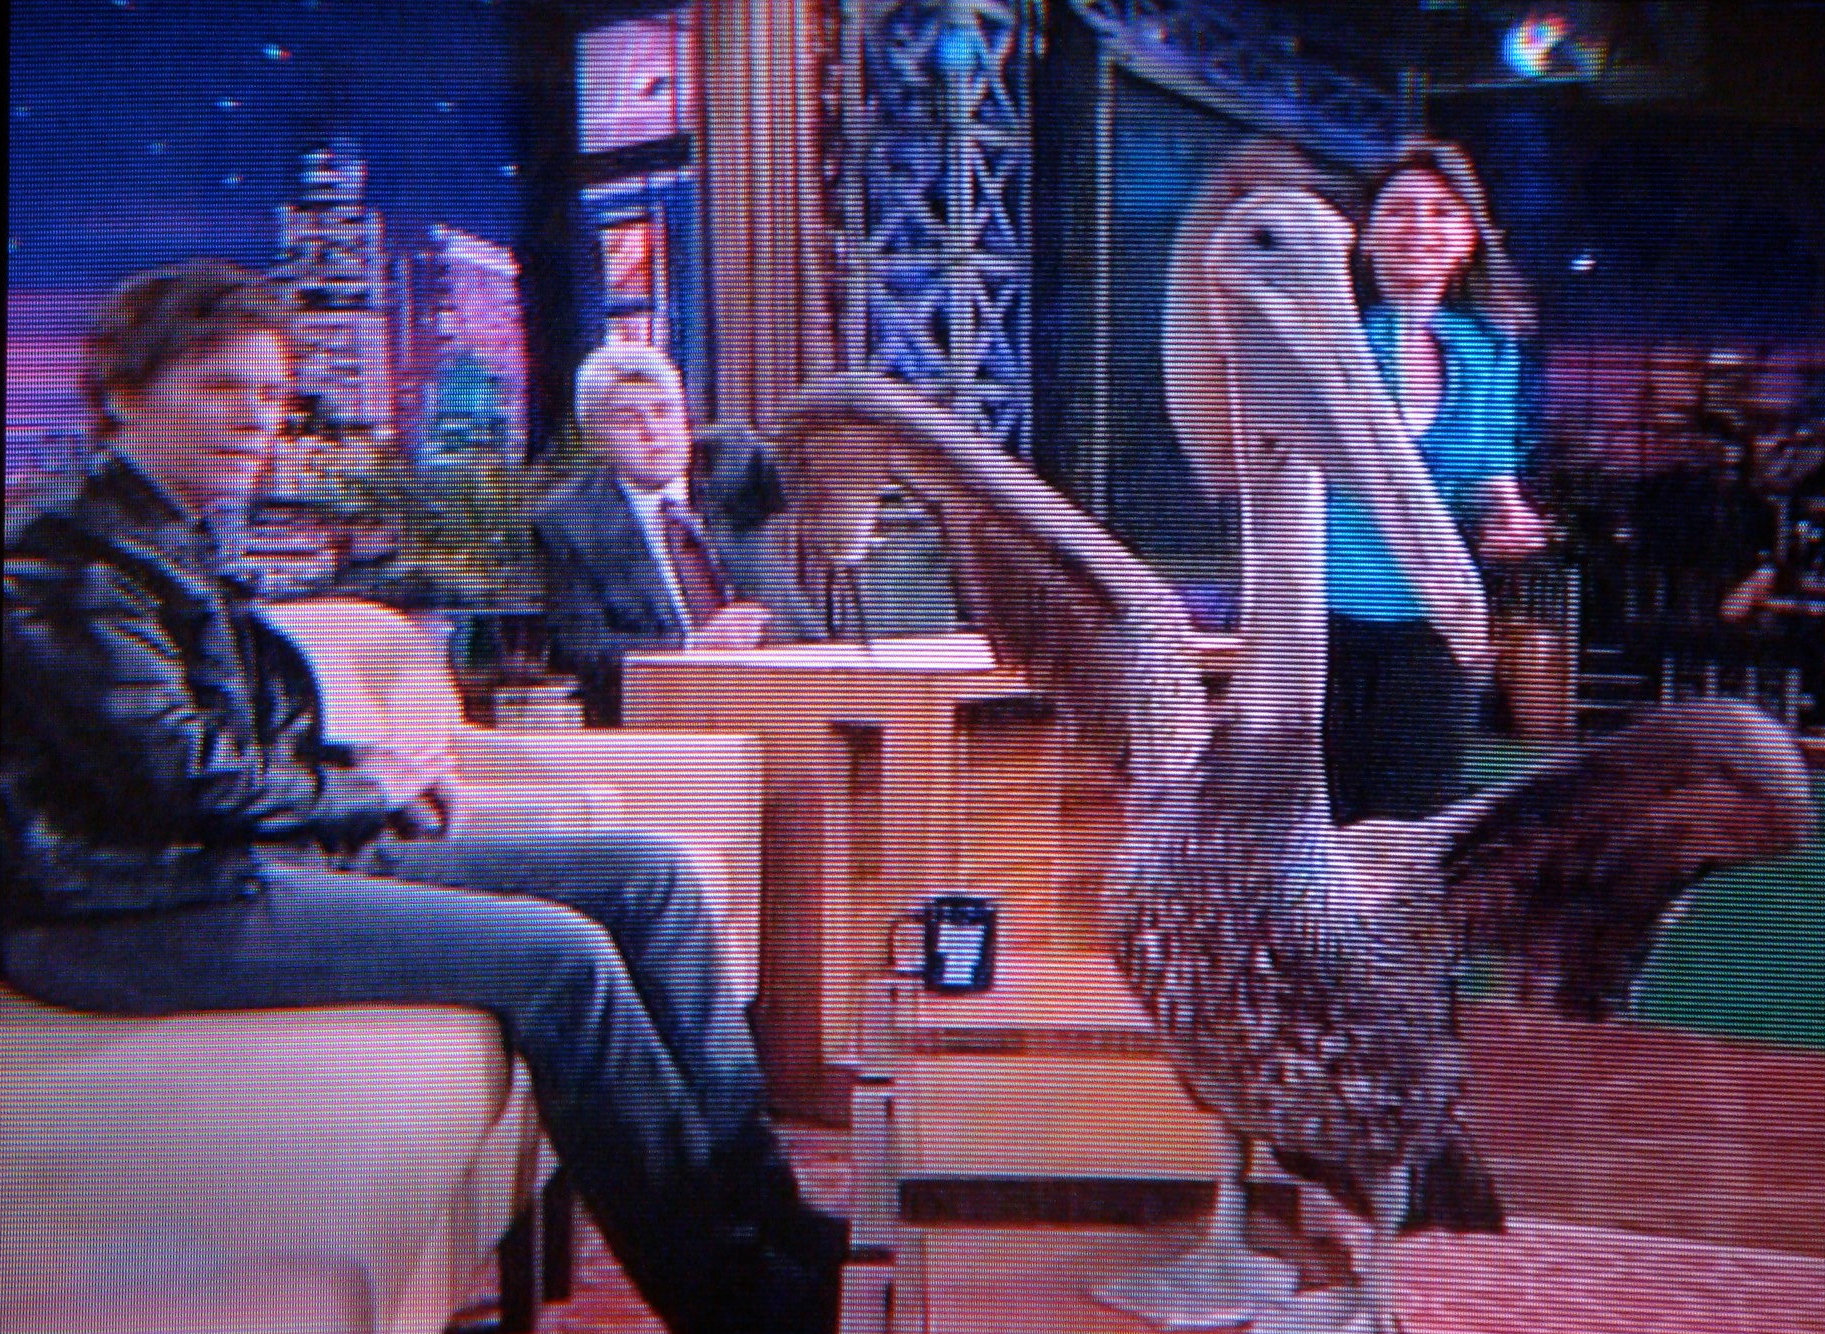 Kevin Bacon and Pelican